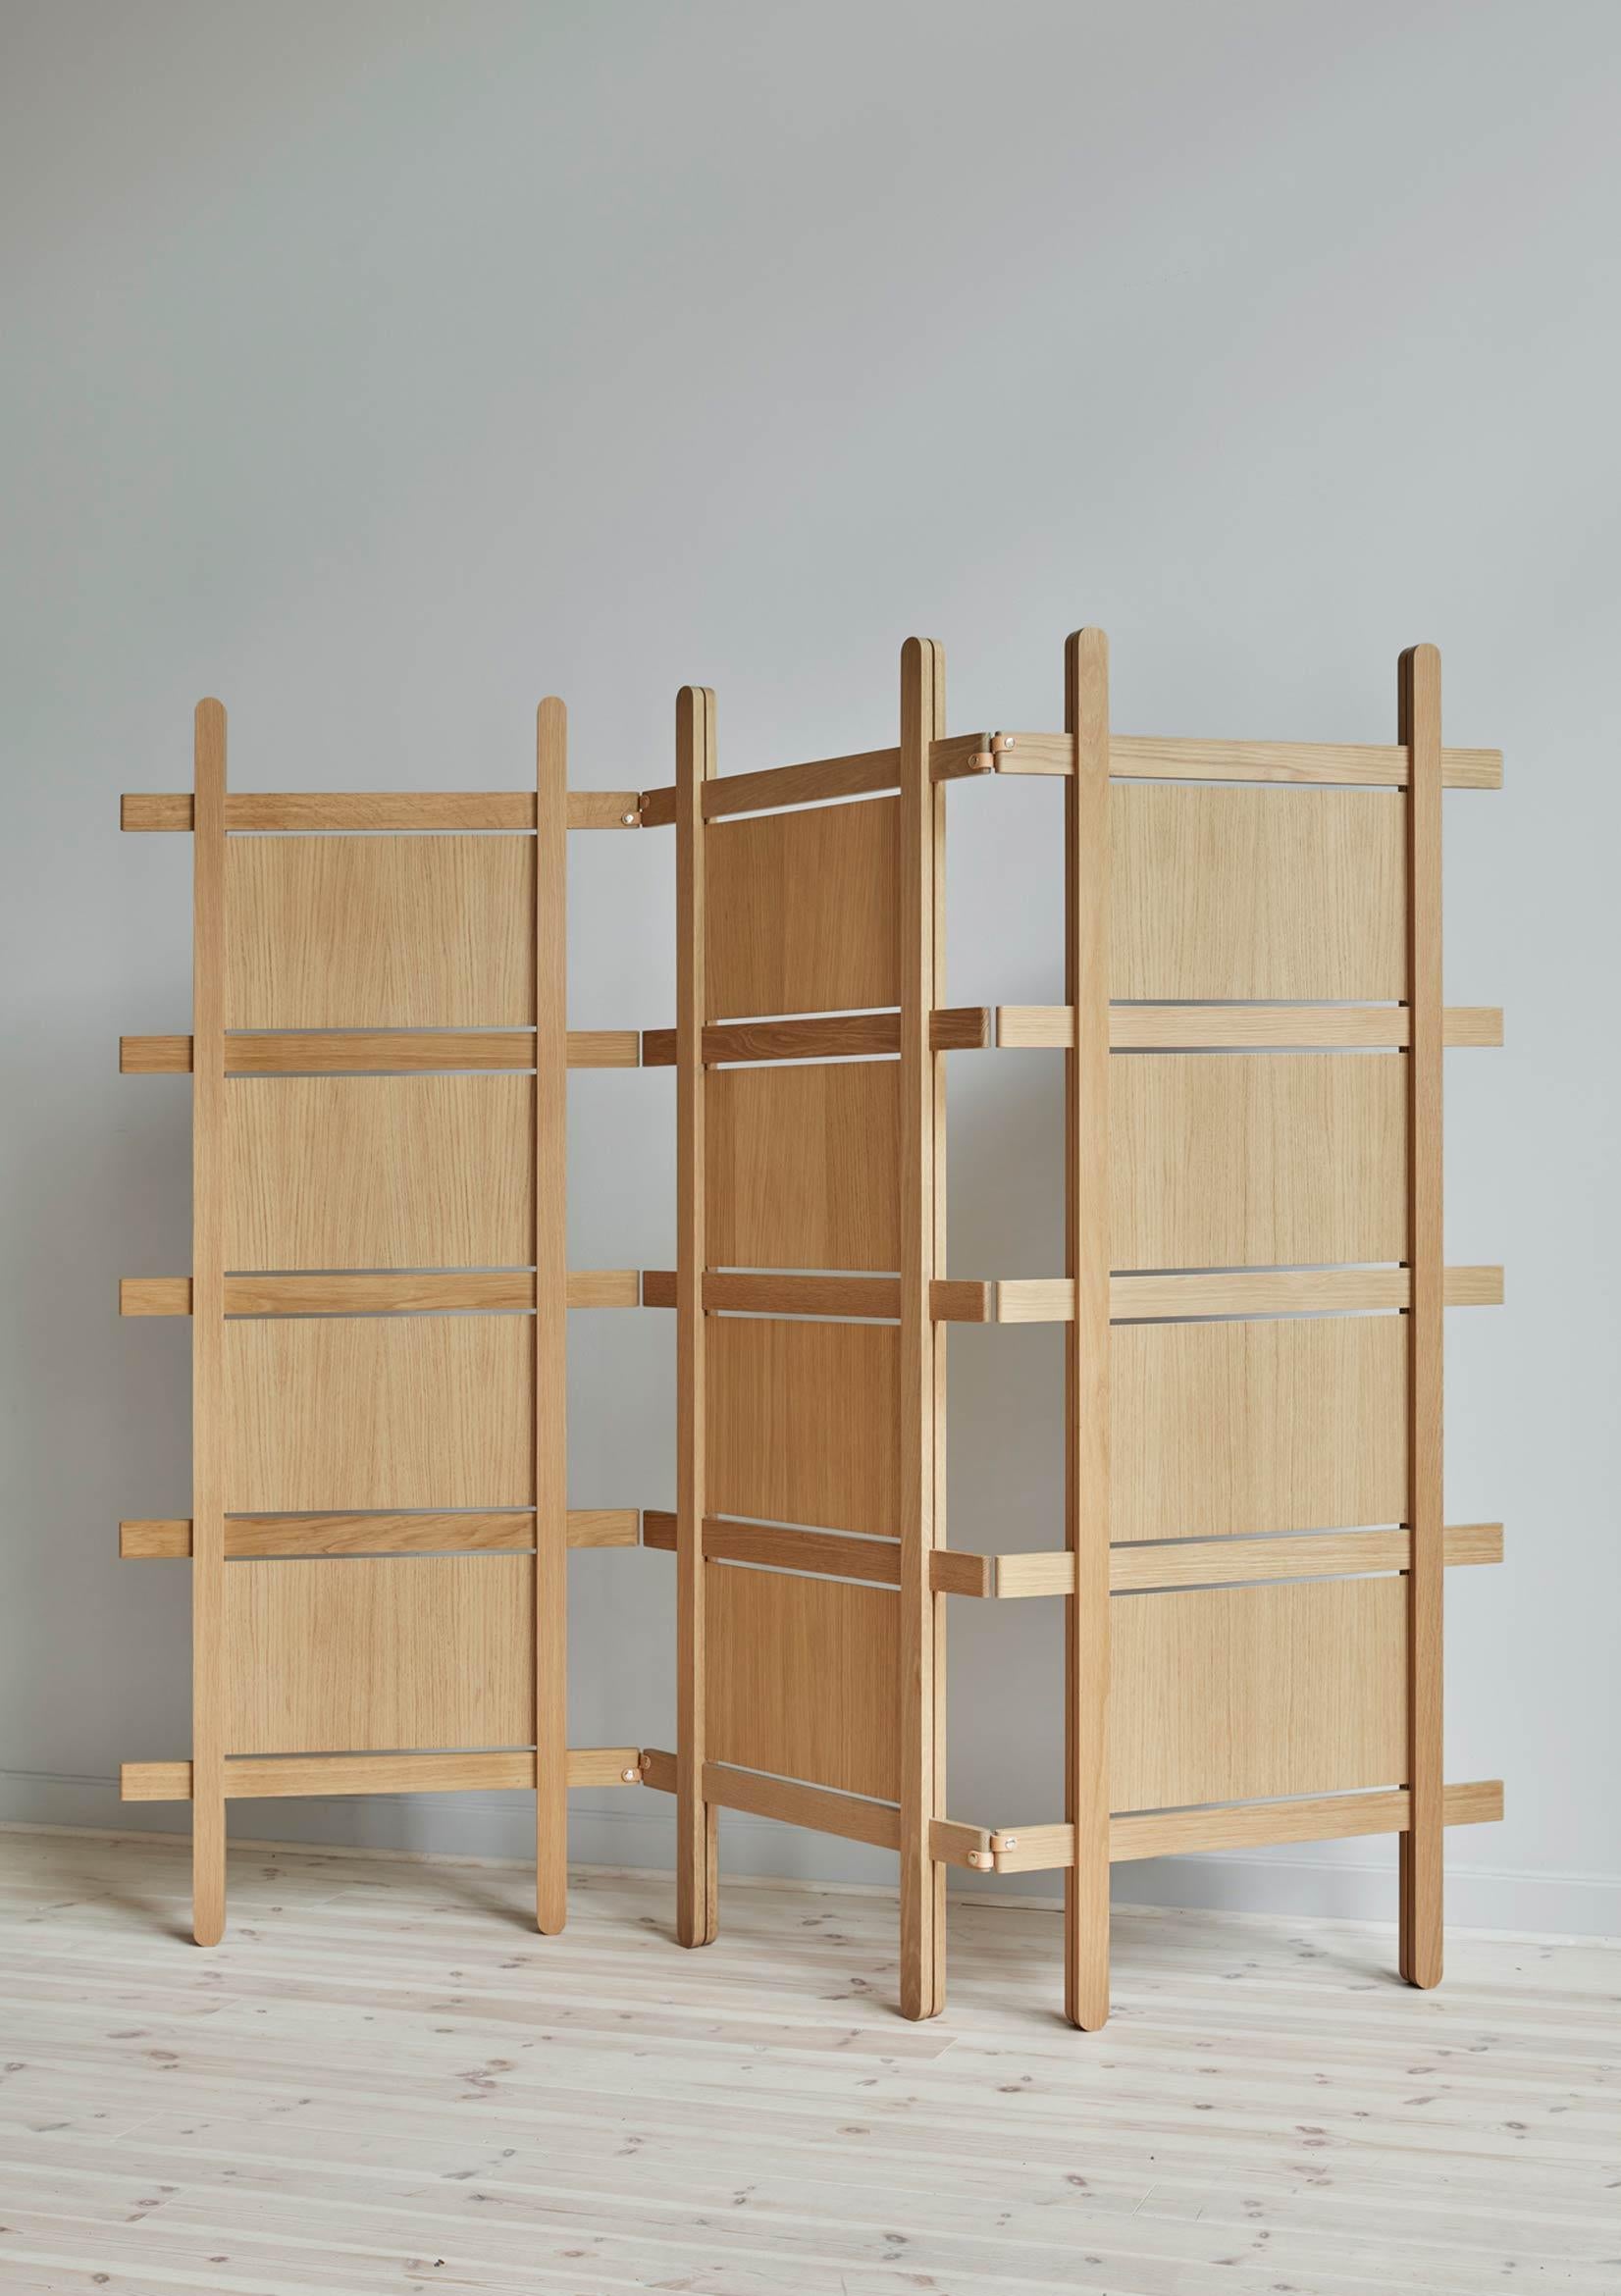 Natural Fold room divider by Storängen Design
Dimensions: D 4 x W 70 x H 170 cm
Materials: oak wood, leather straps.
Available in other colors and with or without pannels.

Fold are made from solid oak with an option off veneered panels. The